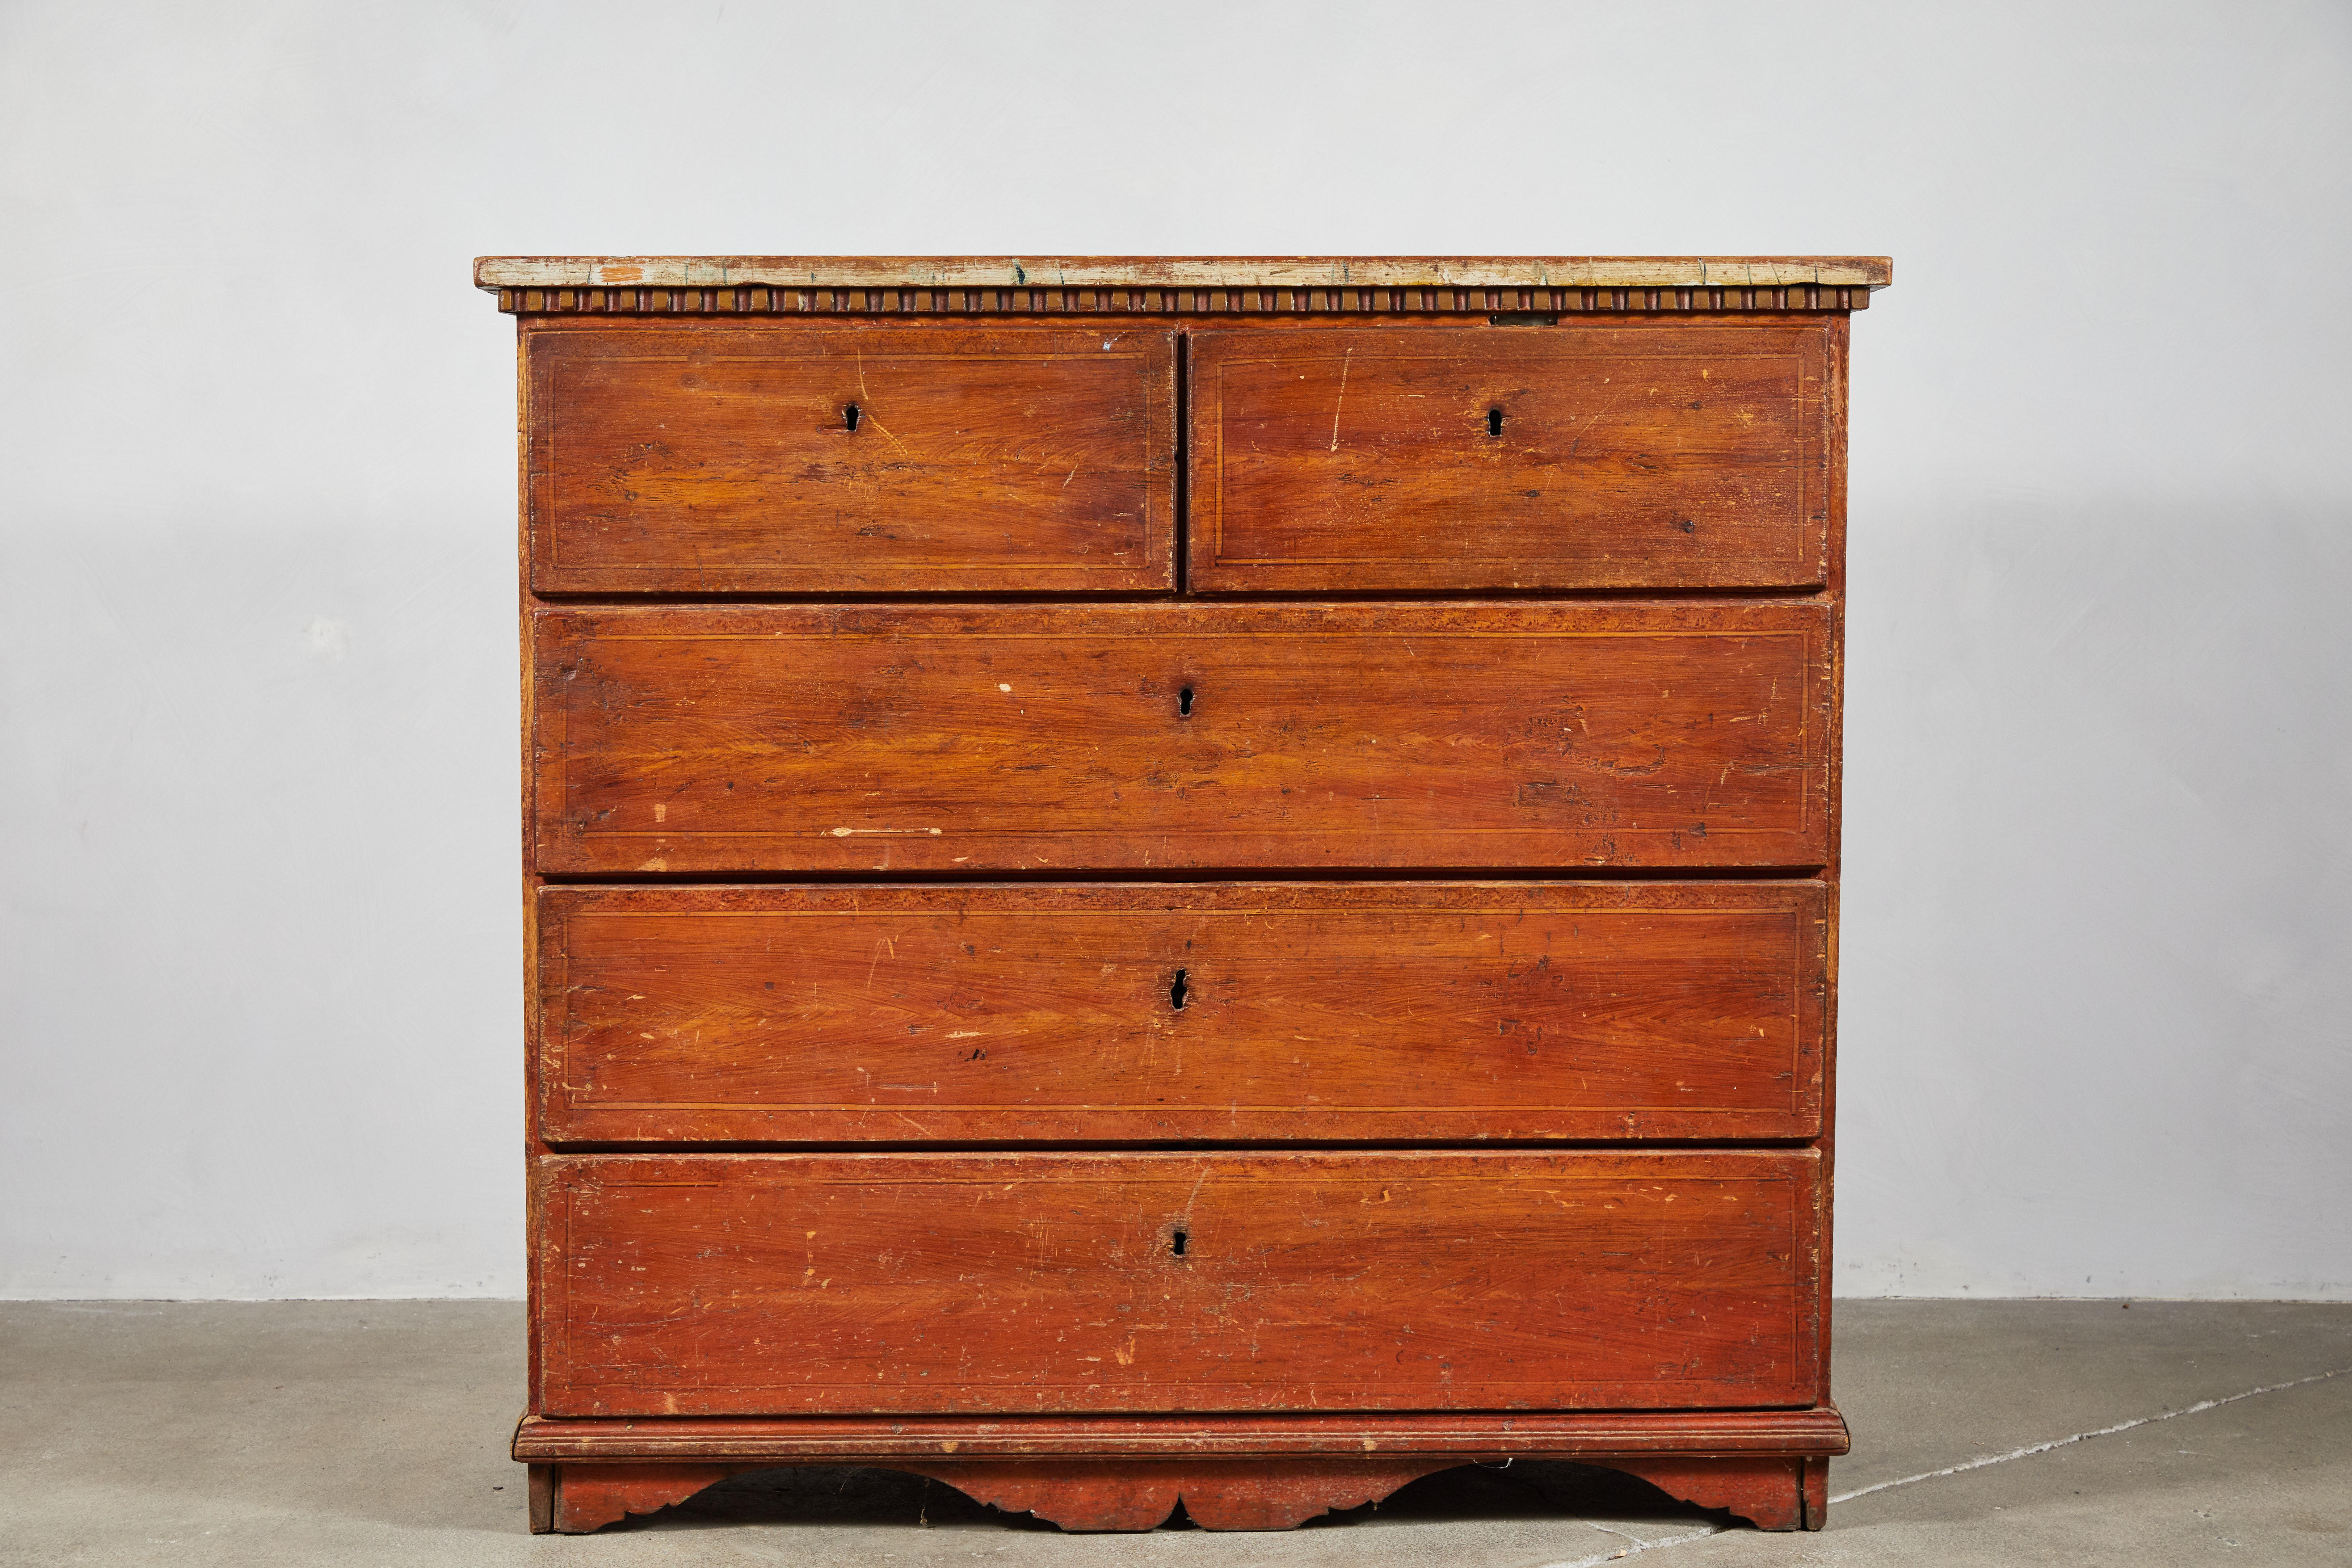 Swedish wooden five-drawer dresser with dental moulding. Dresser top has a beautiful faded washed patina.